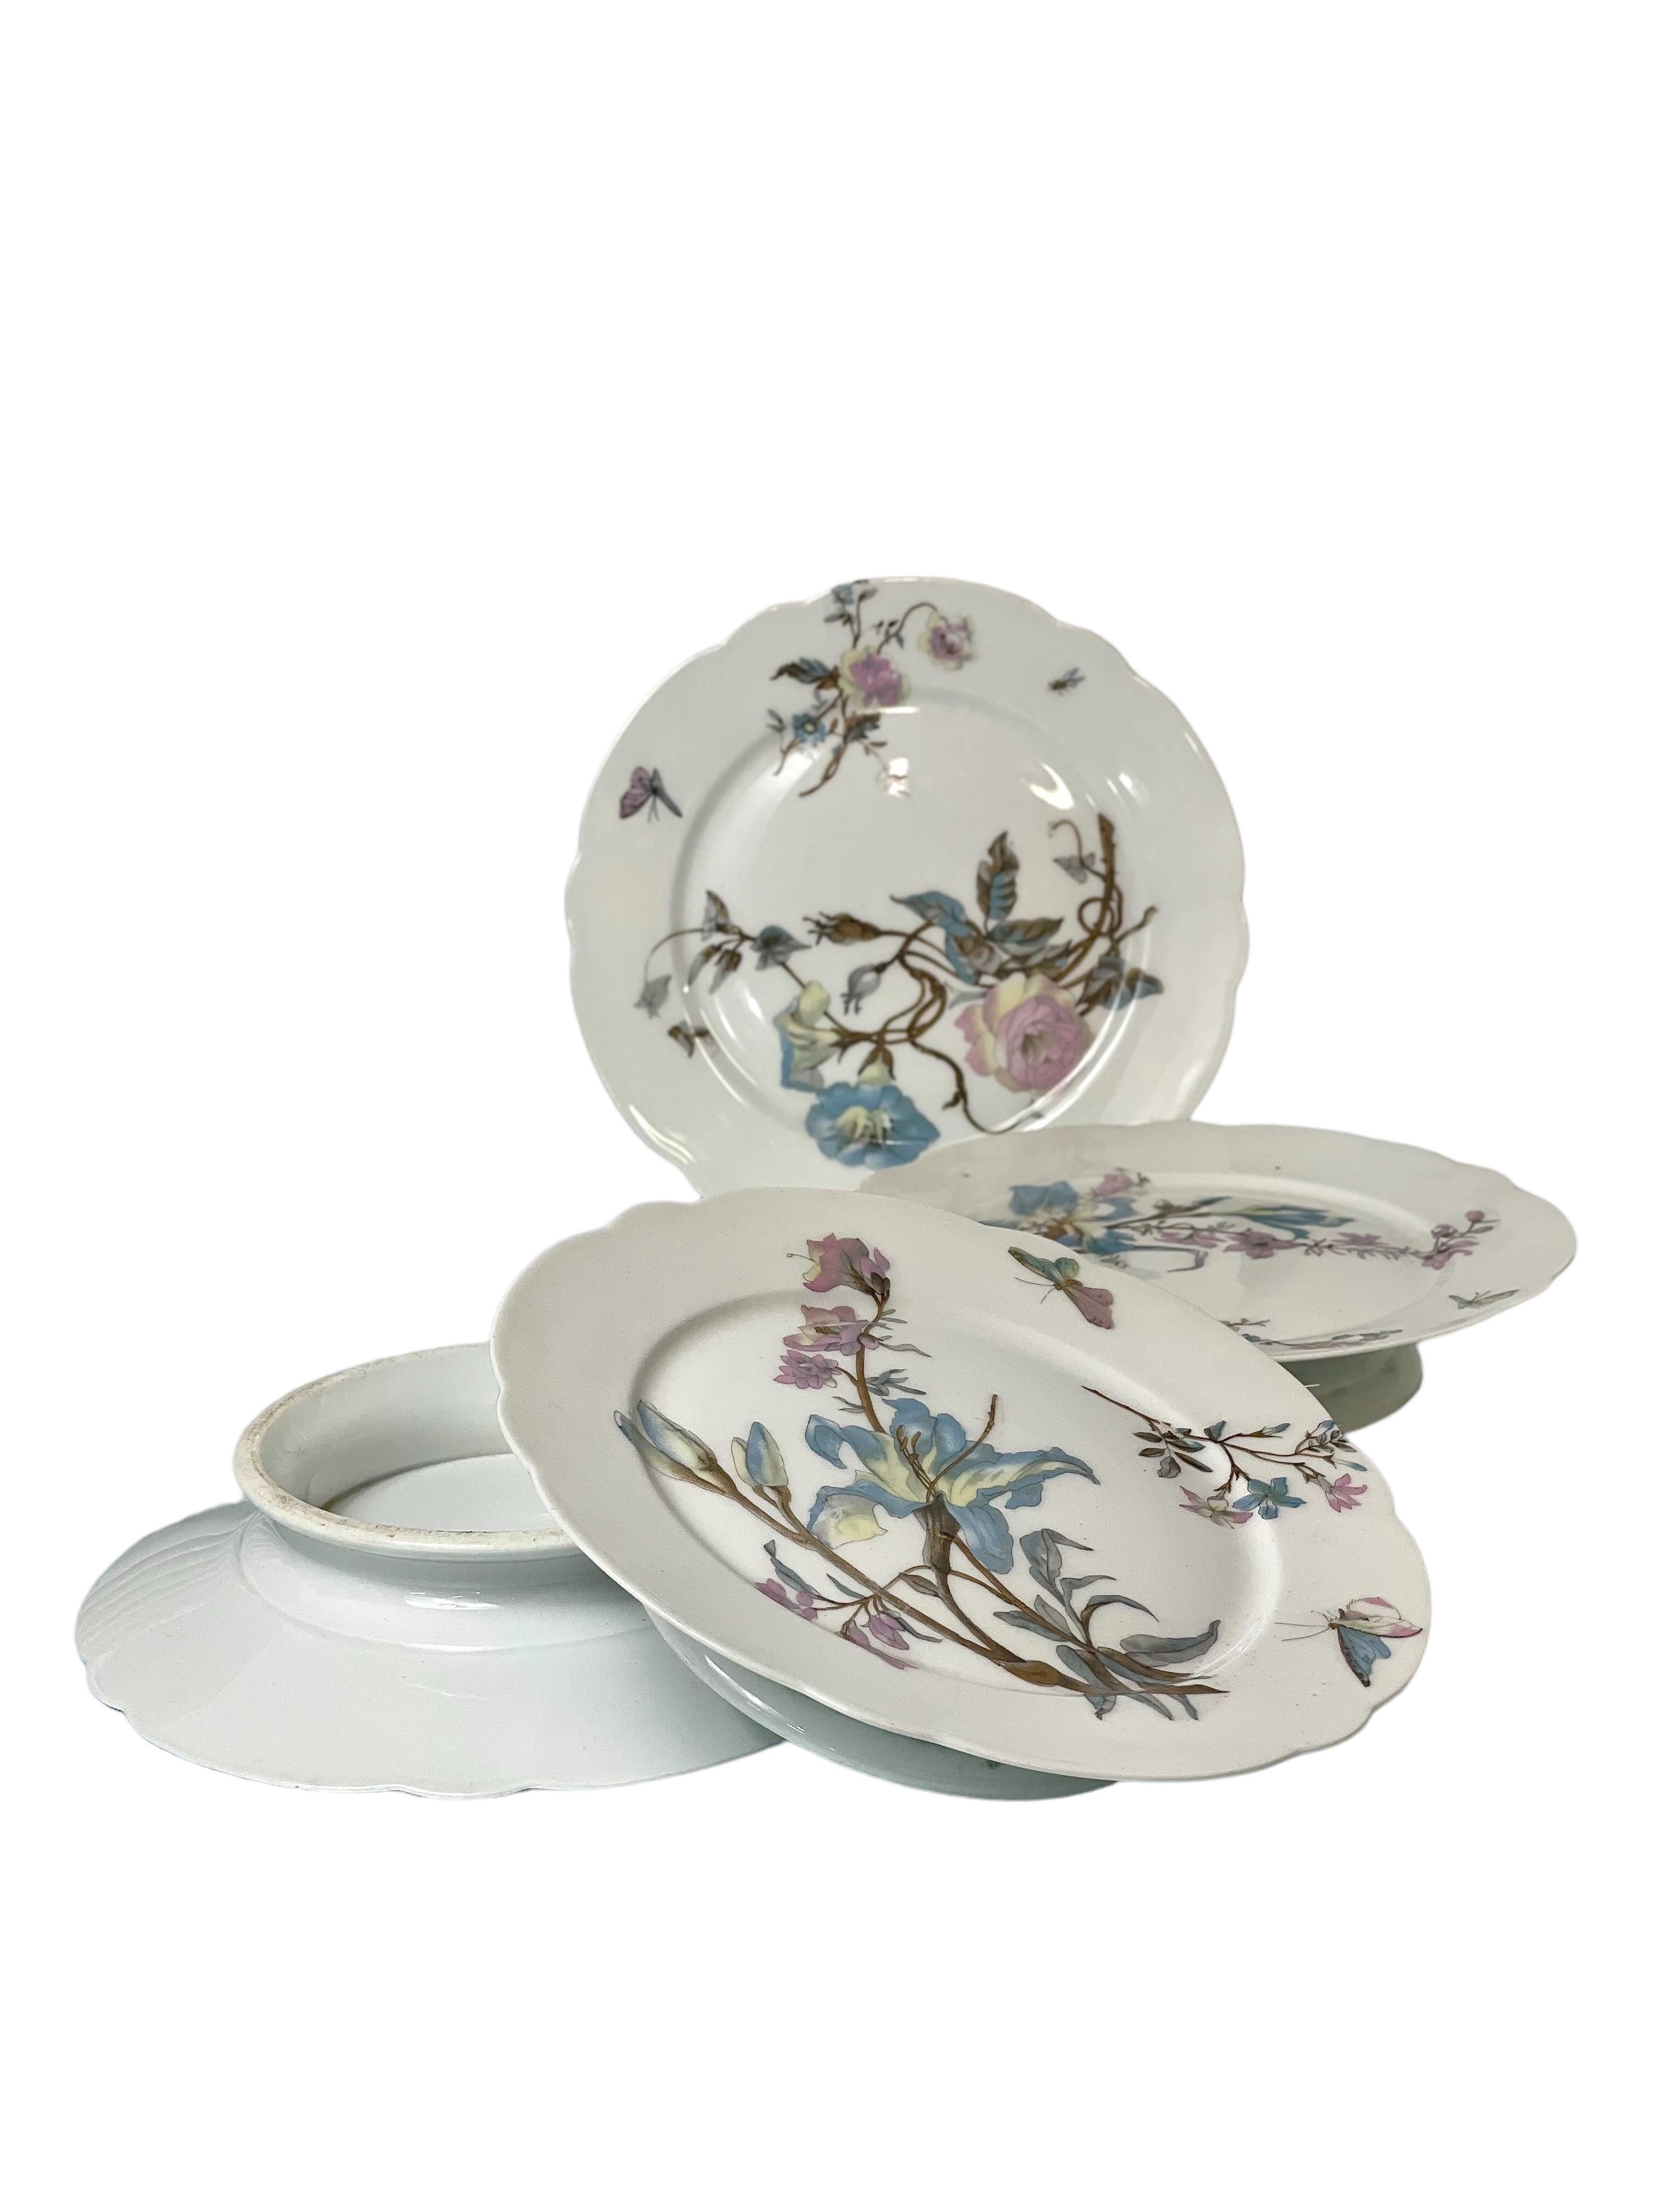 102-Piece Porcelain Dinner Service with Flowers and Butterflies 2